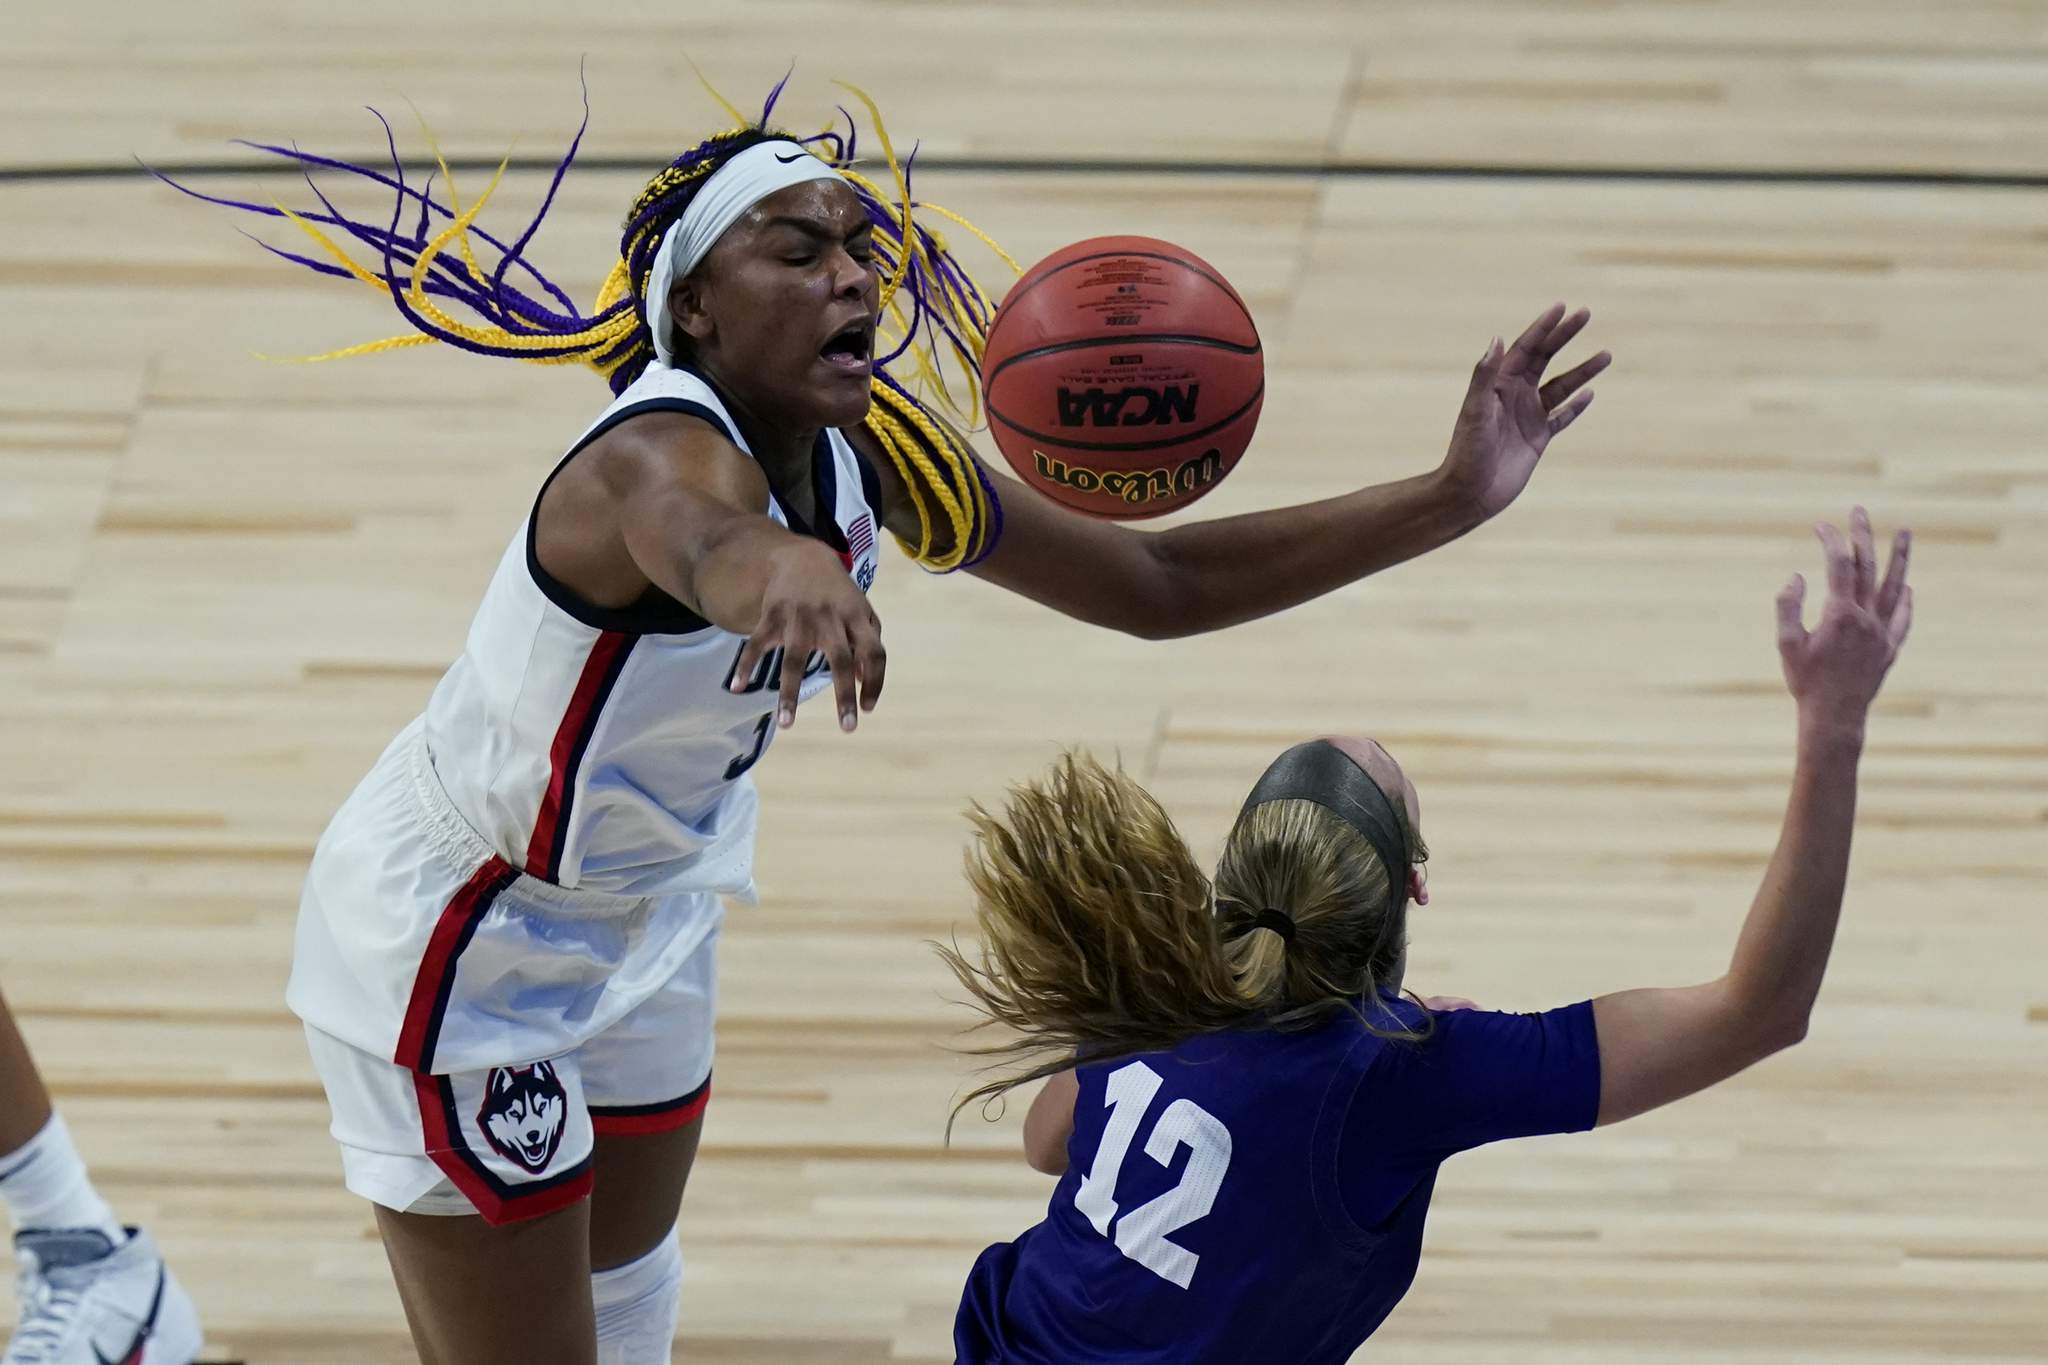 Bueckers helps UConn rout High Point 102-59 in NCAA opener